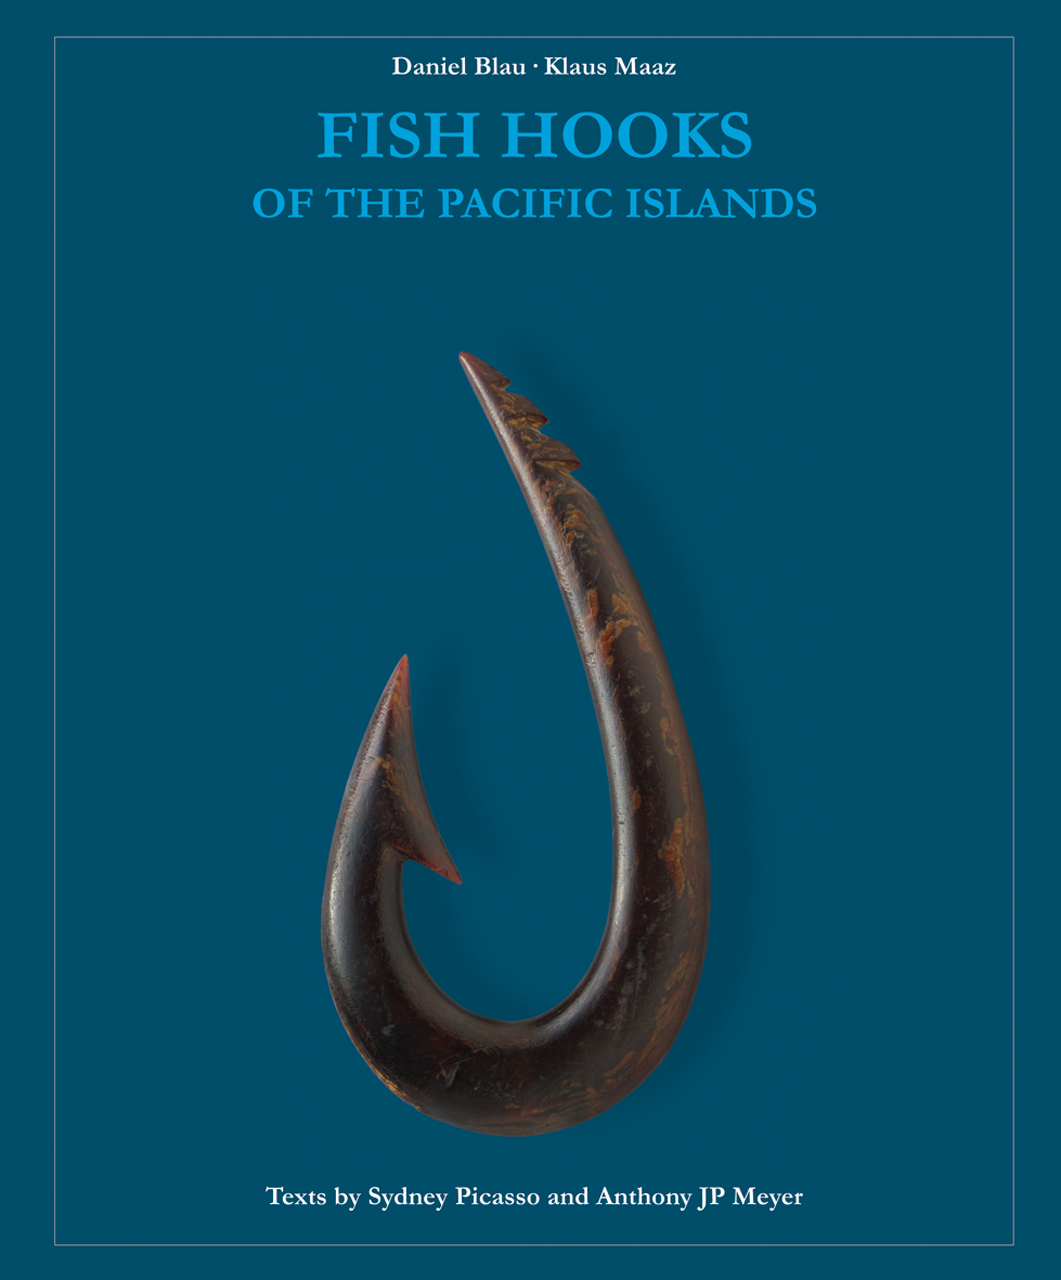 Fish Hooks of the Pacific Islands: A Pictorial Guide to the Fish Hooks from  the Peoples of the Pacific Islands, Blau, Maaz